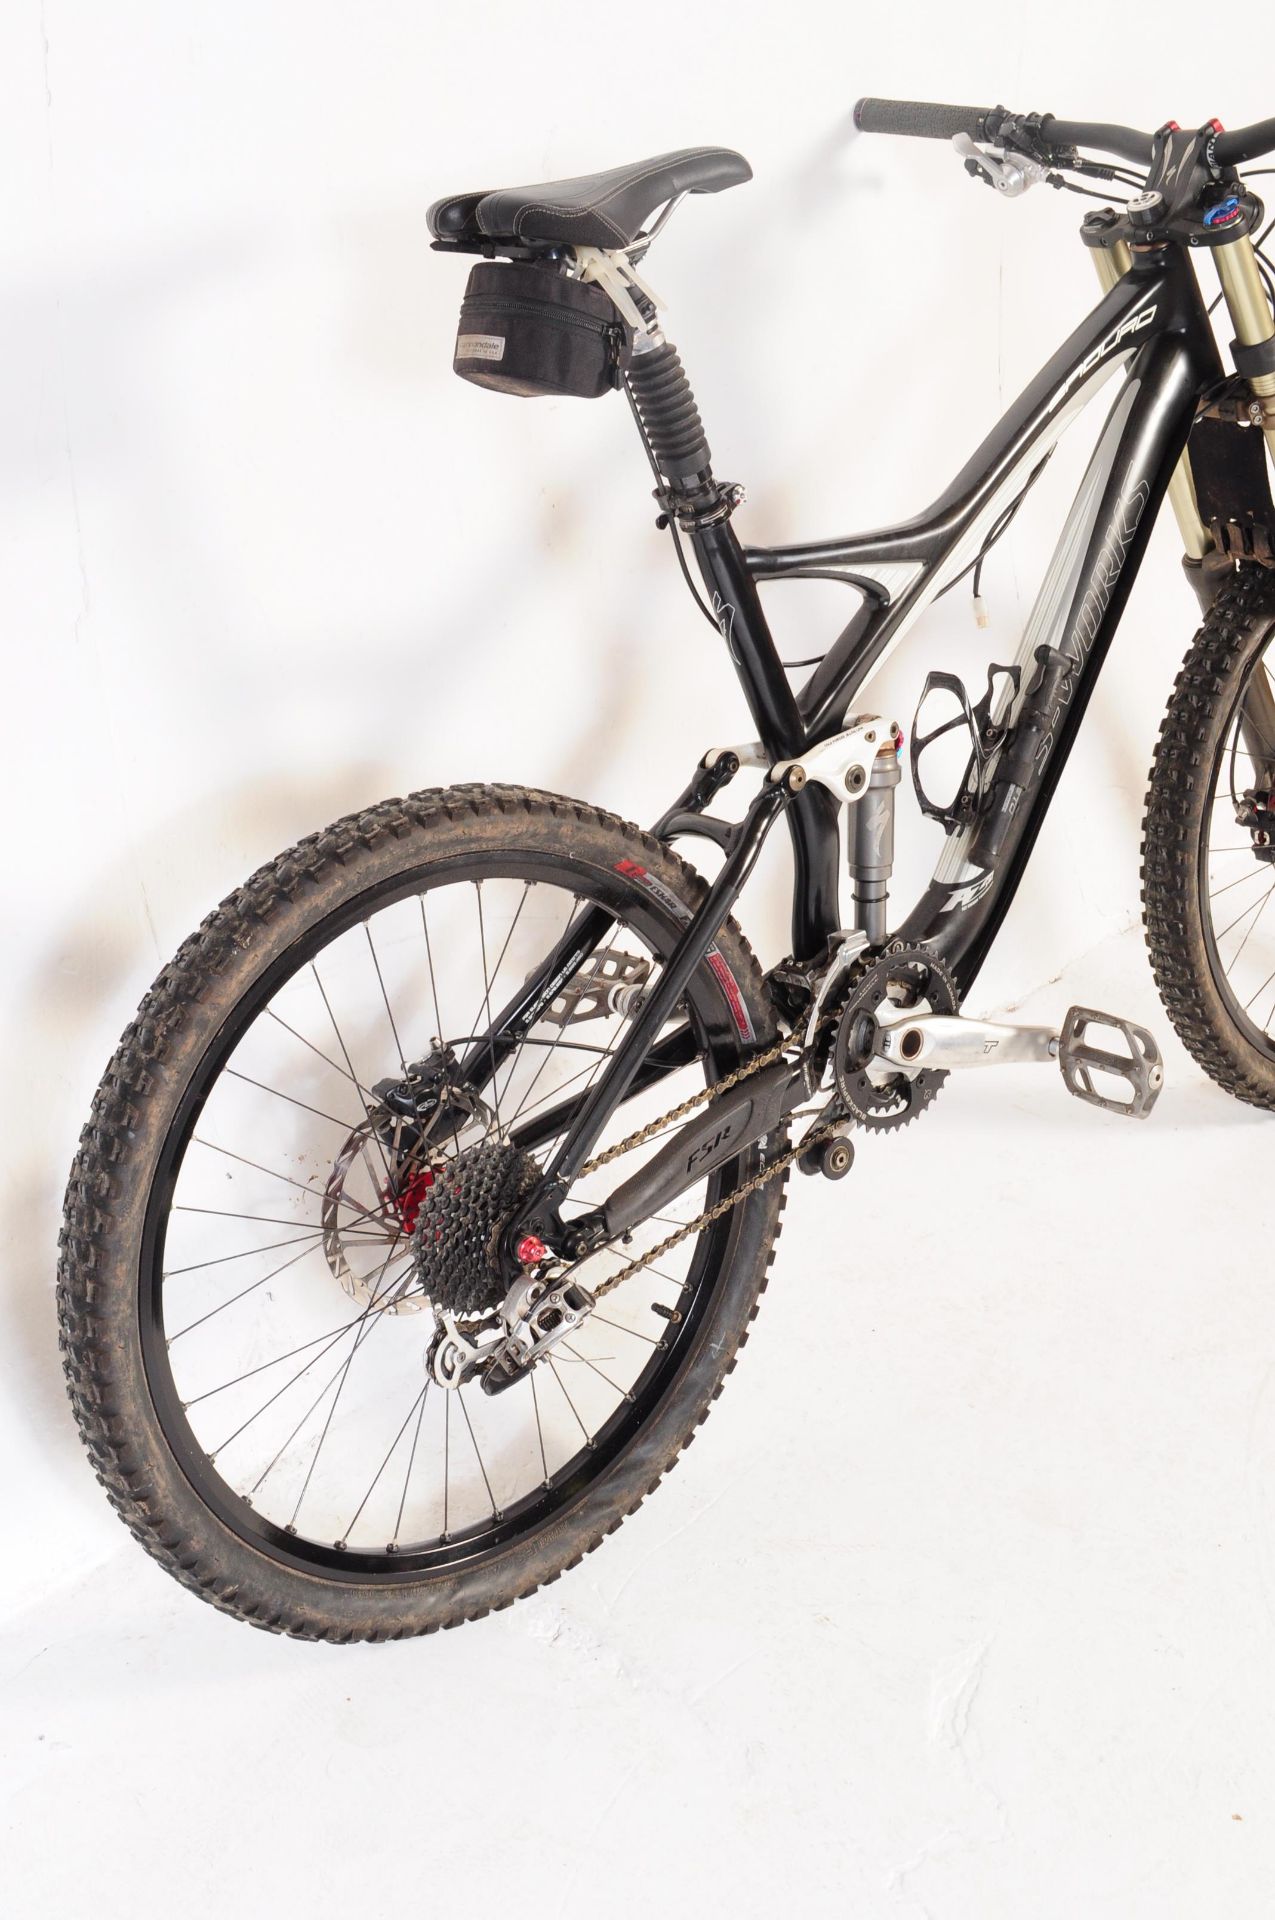 CONTEMPORARY CARBON FIBRE MOUNTAIN BIKE BY S-WORKS - Image 3 of 9